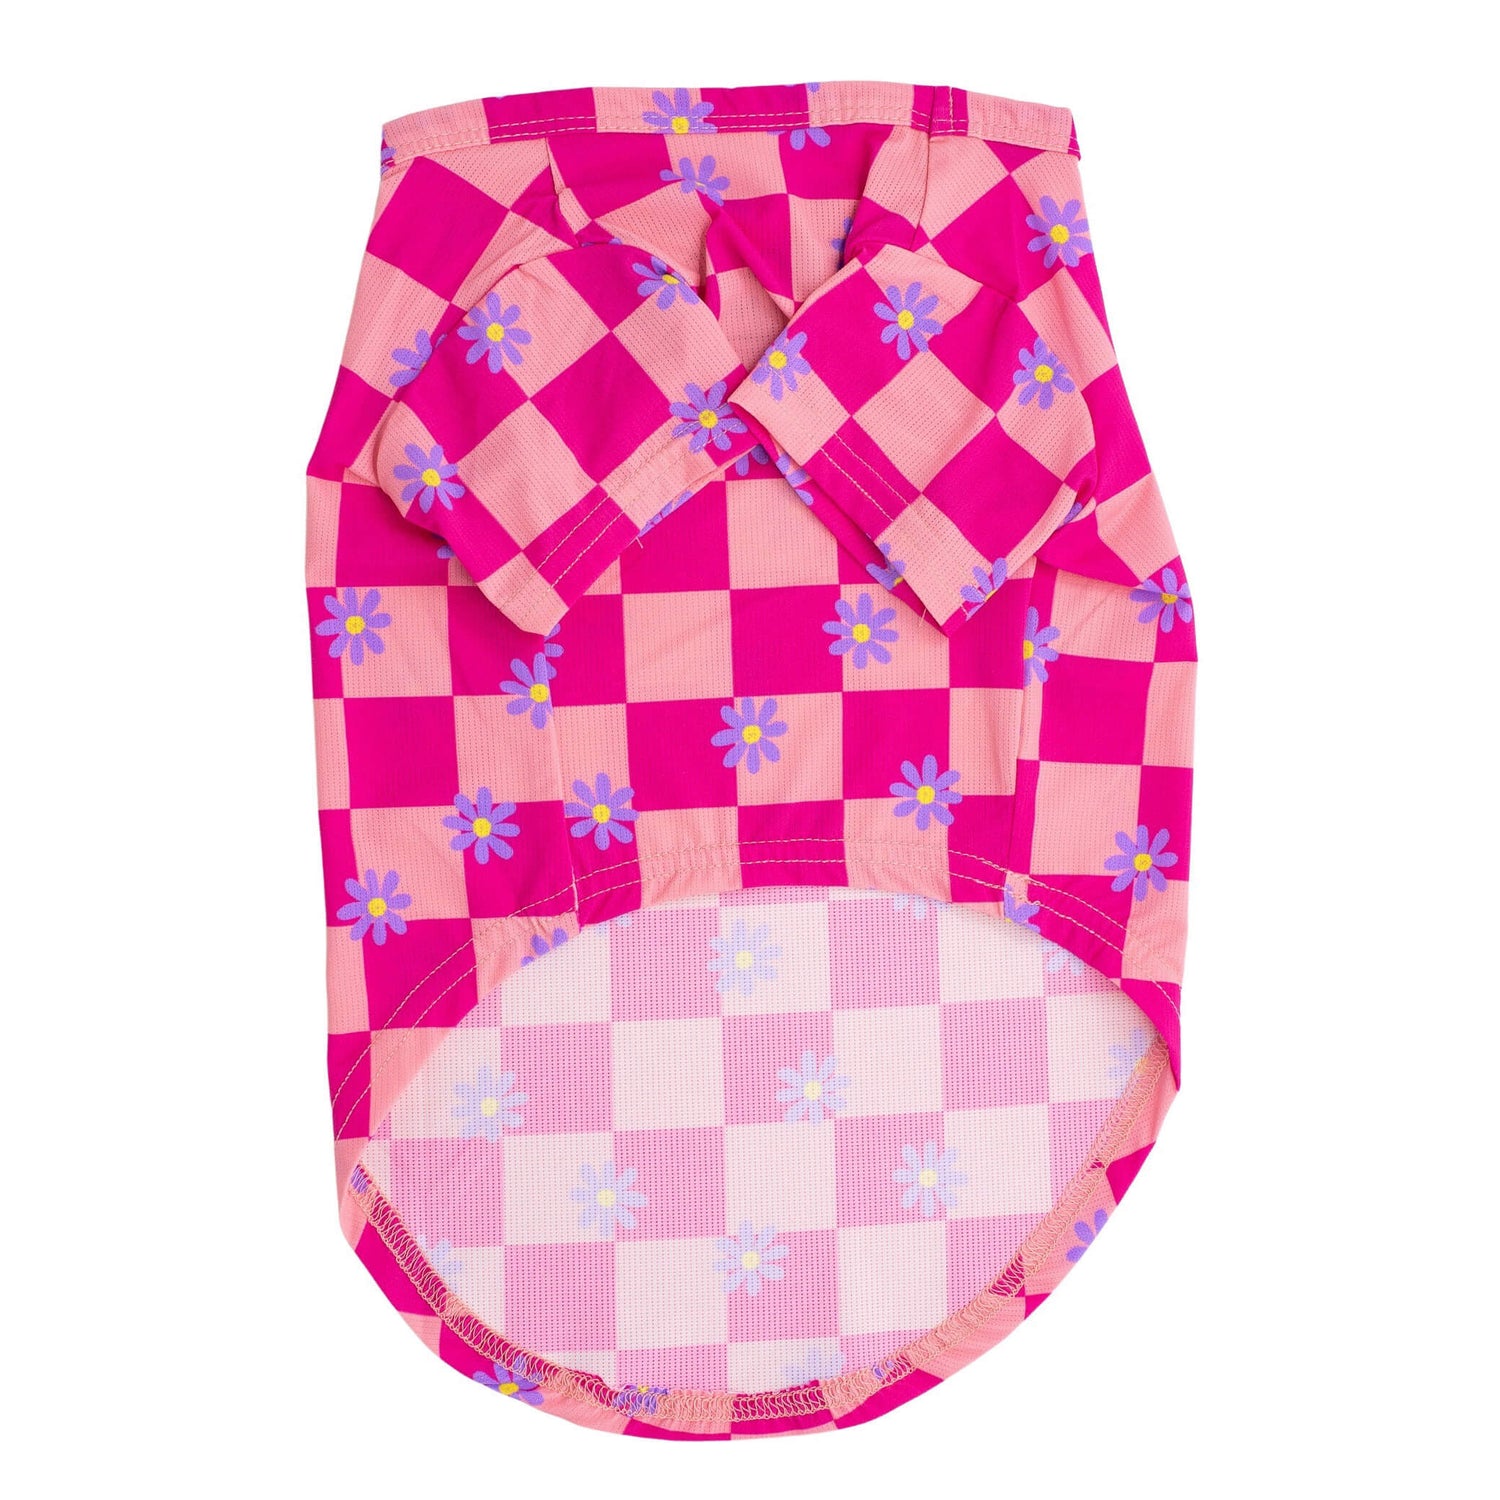 Front flat lay of Vibrant Hounds Crazy Daisy cooling shirt for dogs. It is pink chequered with daisys printed on it.